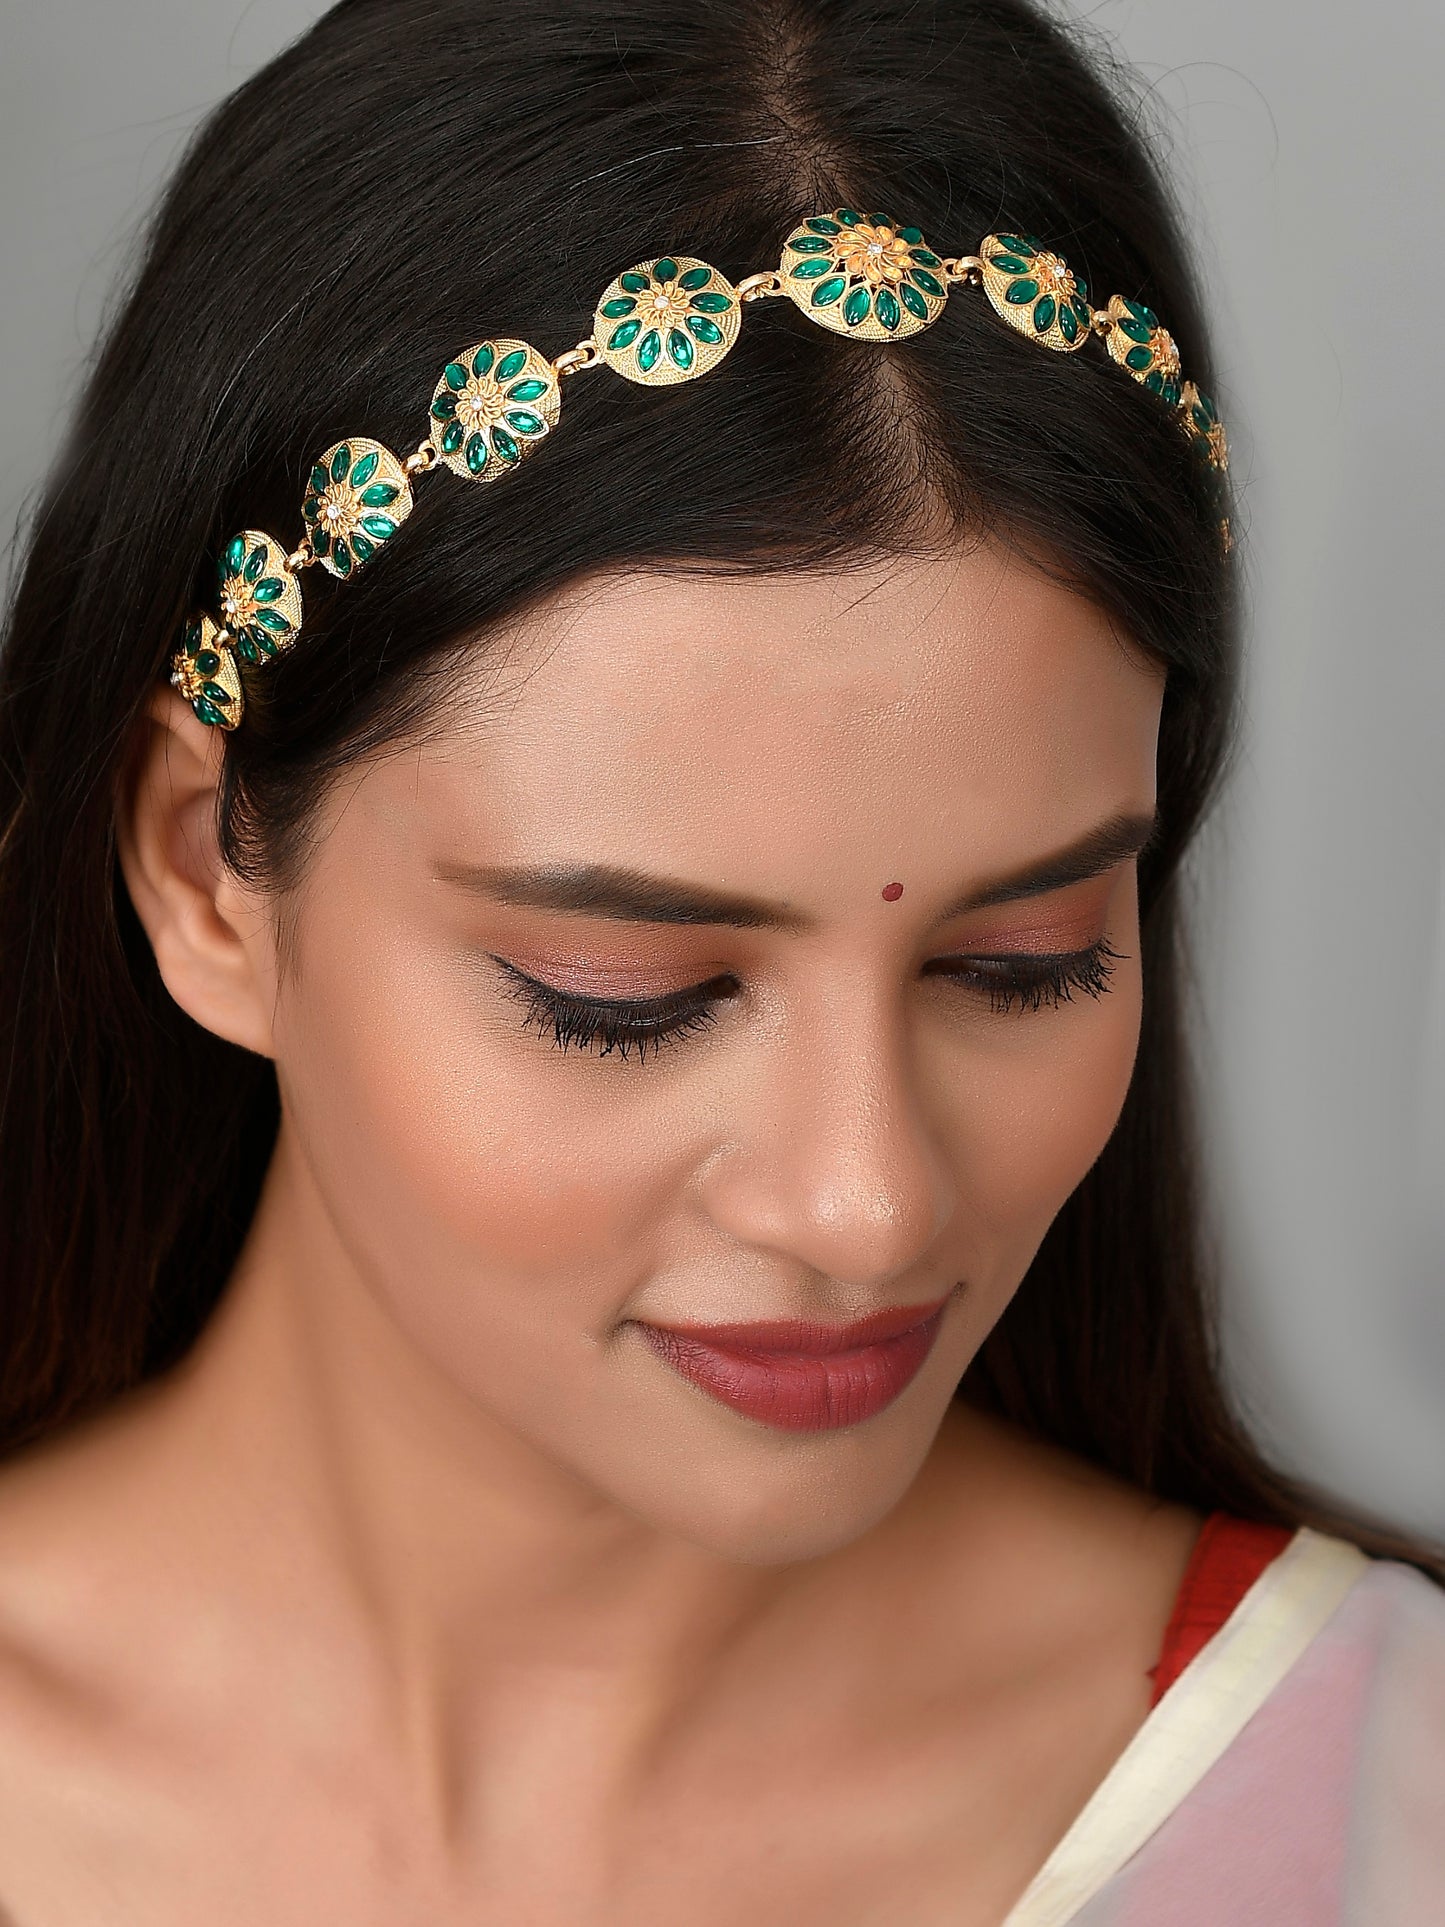 Gold Toned Ethnic matha patti Traditional Enamelled Head Chain